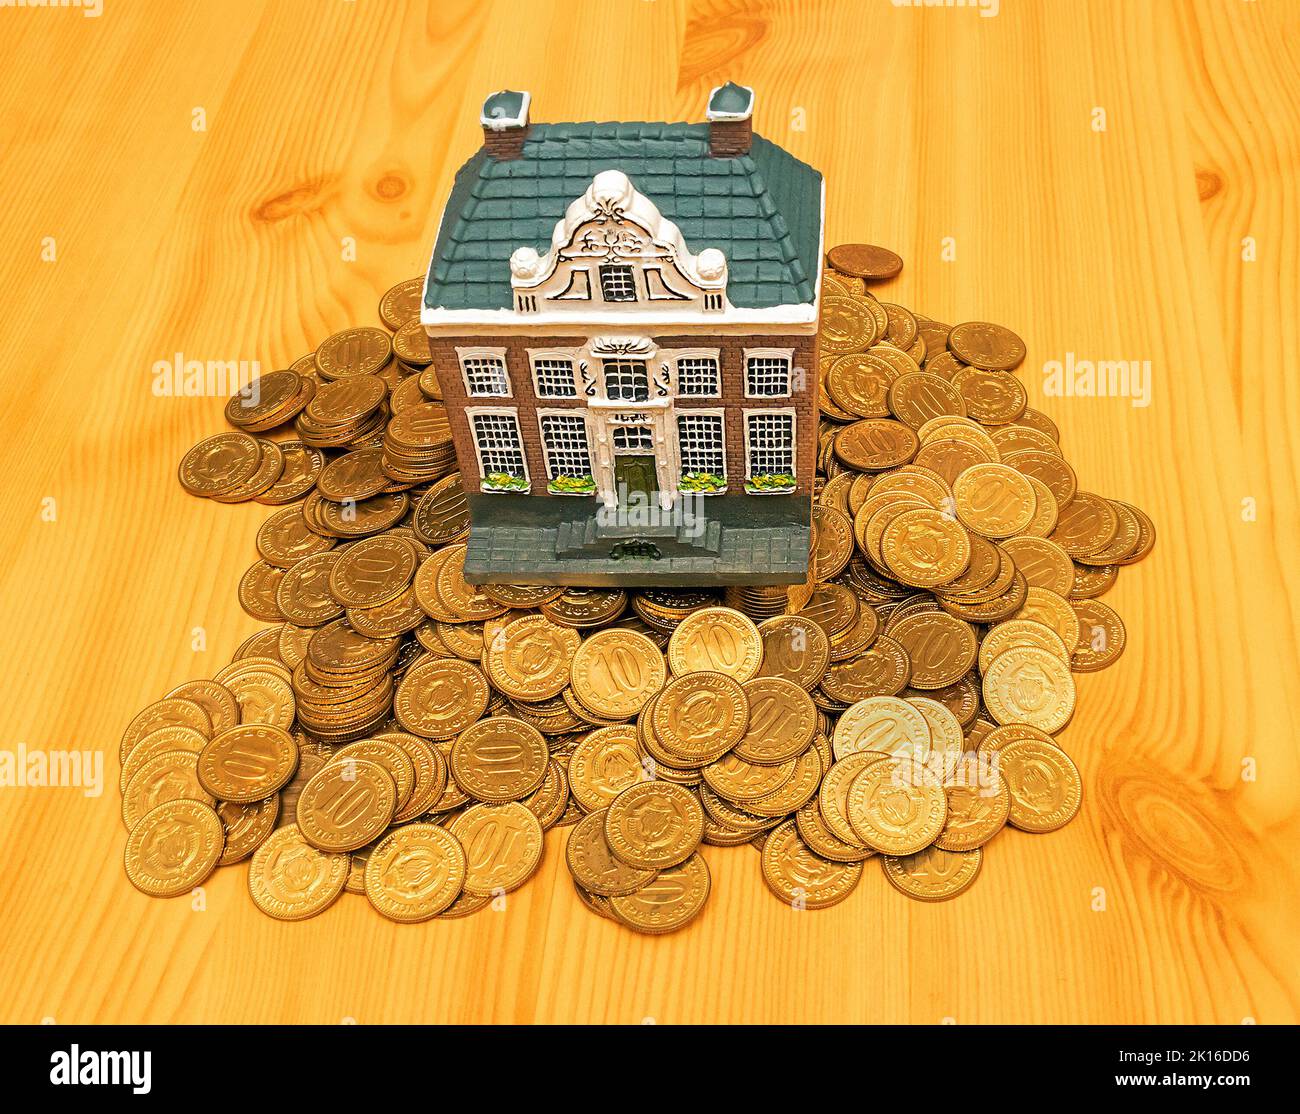 Retro residential house model on pile of gold coins representing concept of climbing property ladder Stock Photo